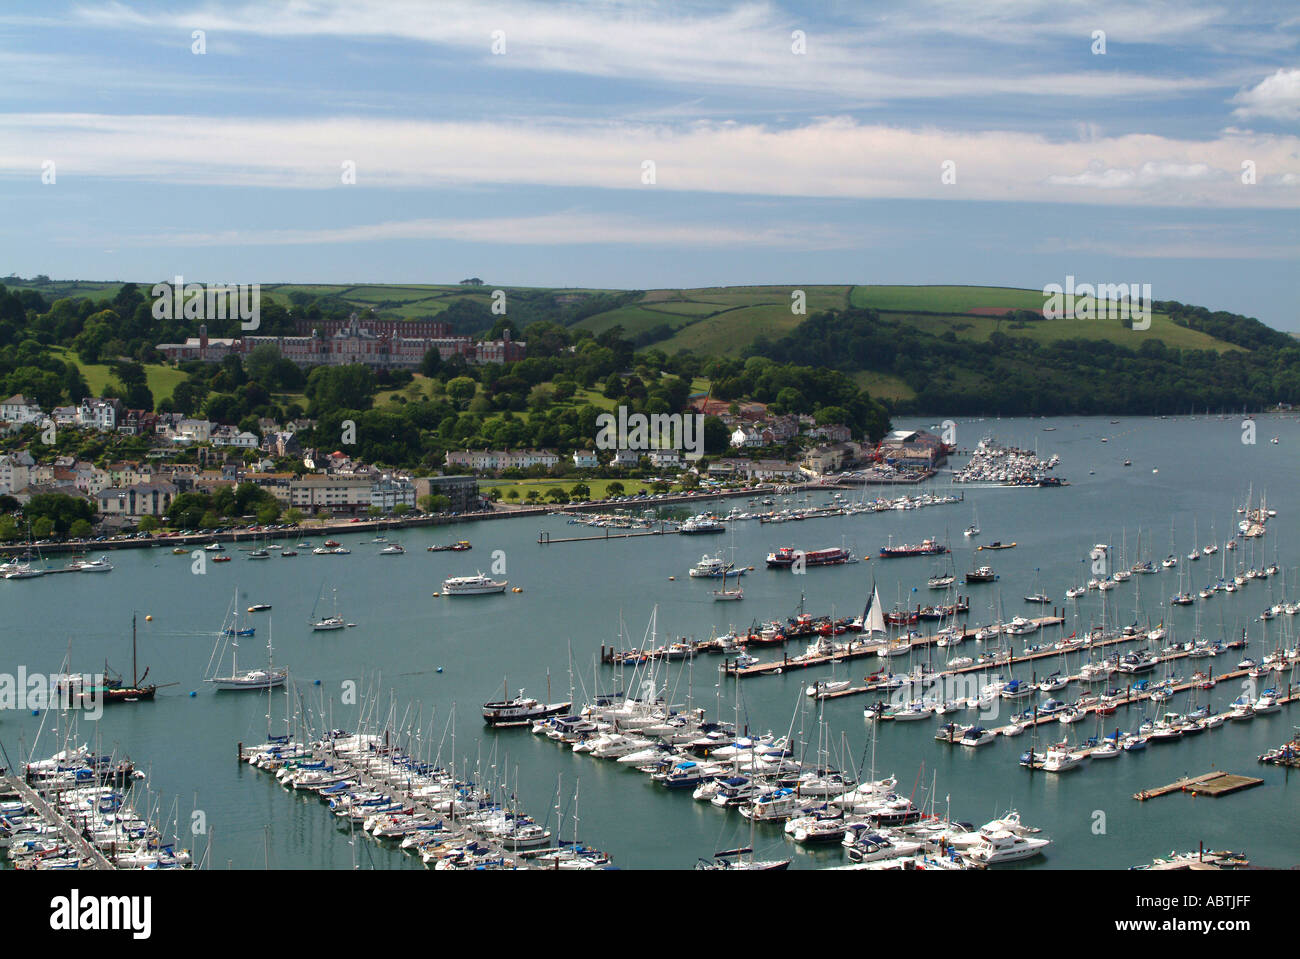 Marina at Kingswear with Brittania Royal Naval College Dartmouth on Hill in Background Devon England United Kingdom UK Stock Photo